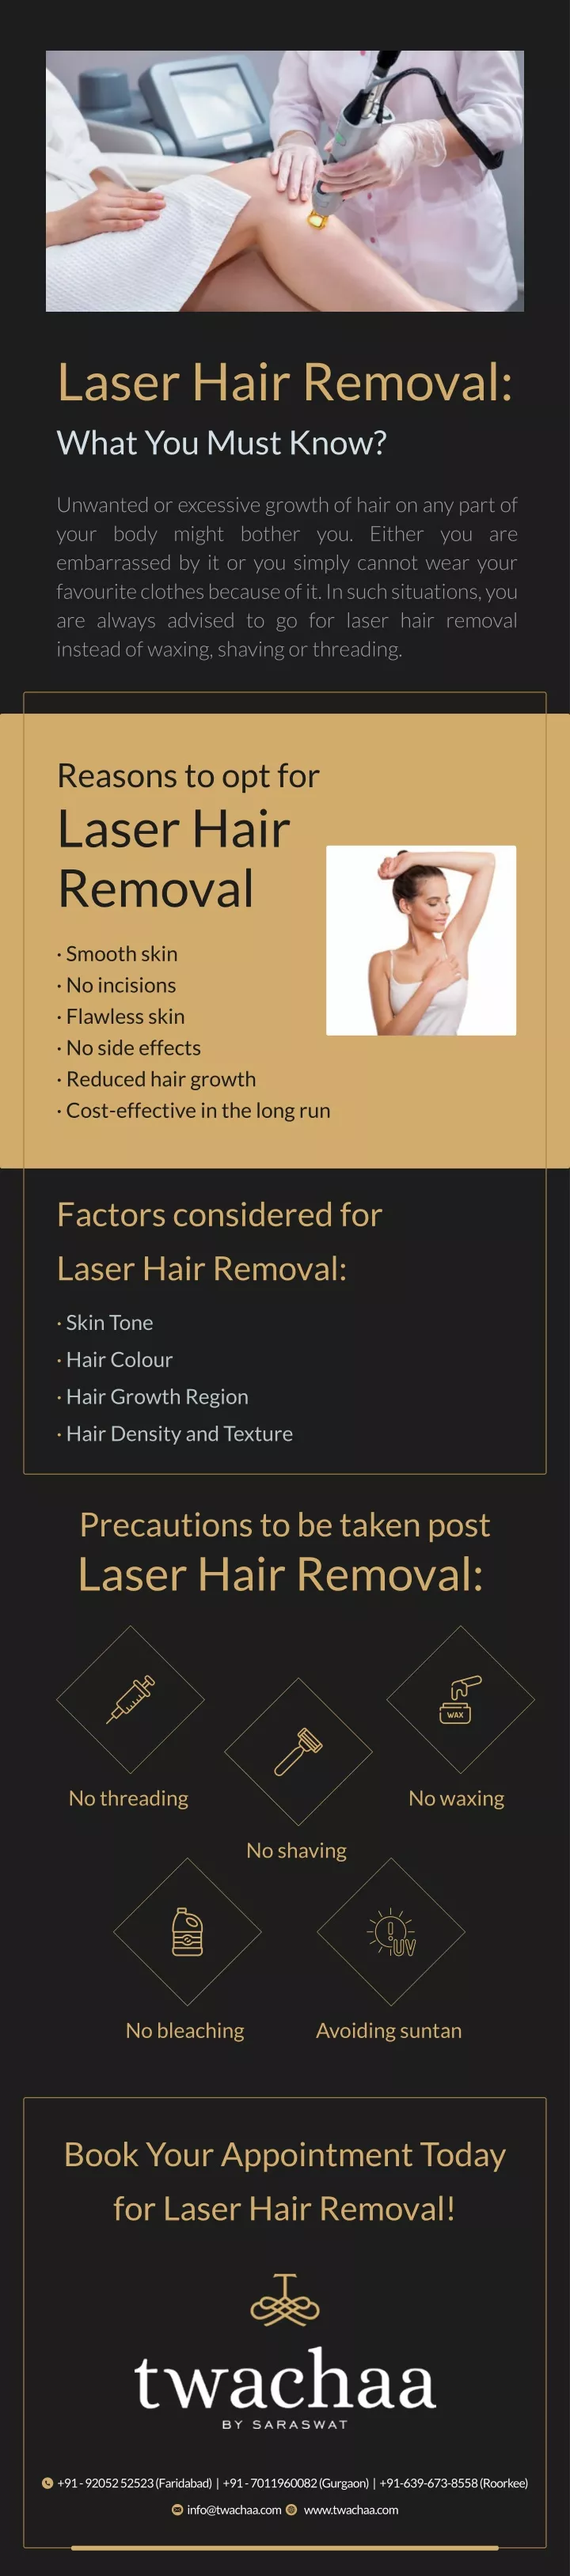 laser hair removal what you must know